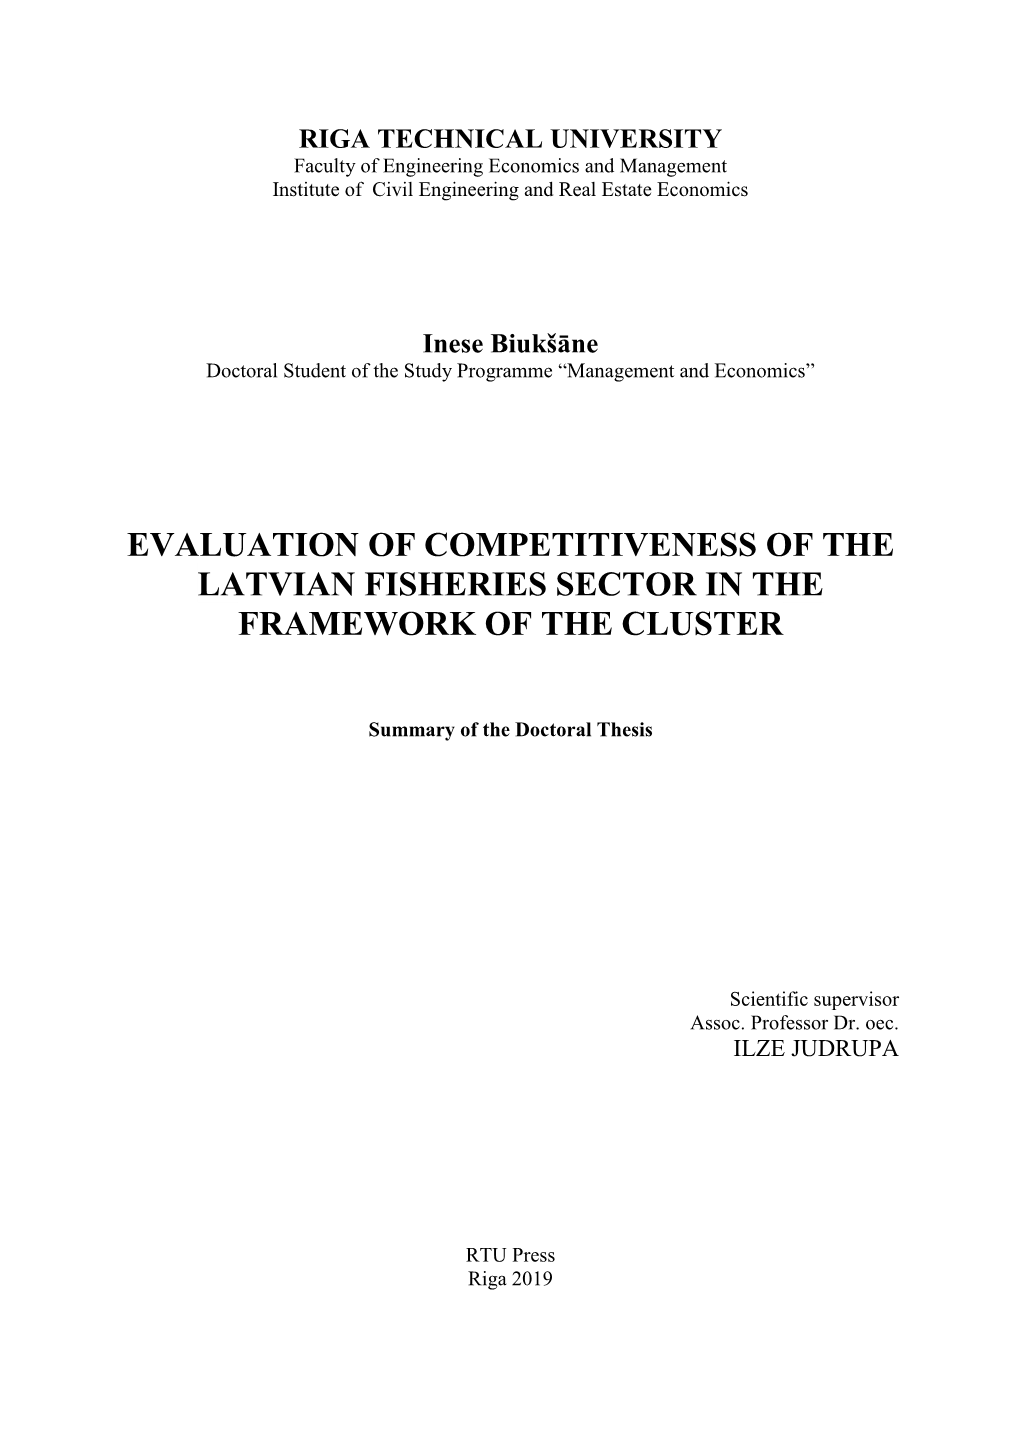 Evaluation of Competitiveness of the Latvian Fisheries Sector in the Framework of the Cluster